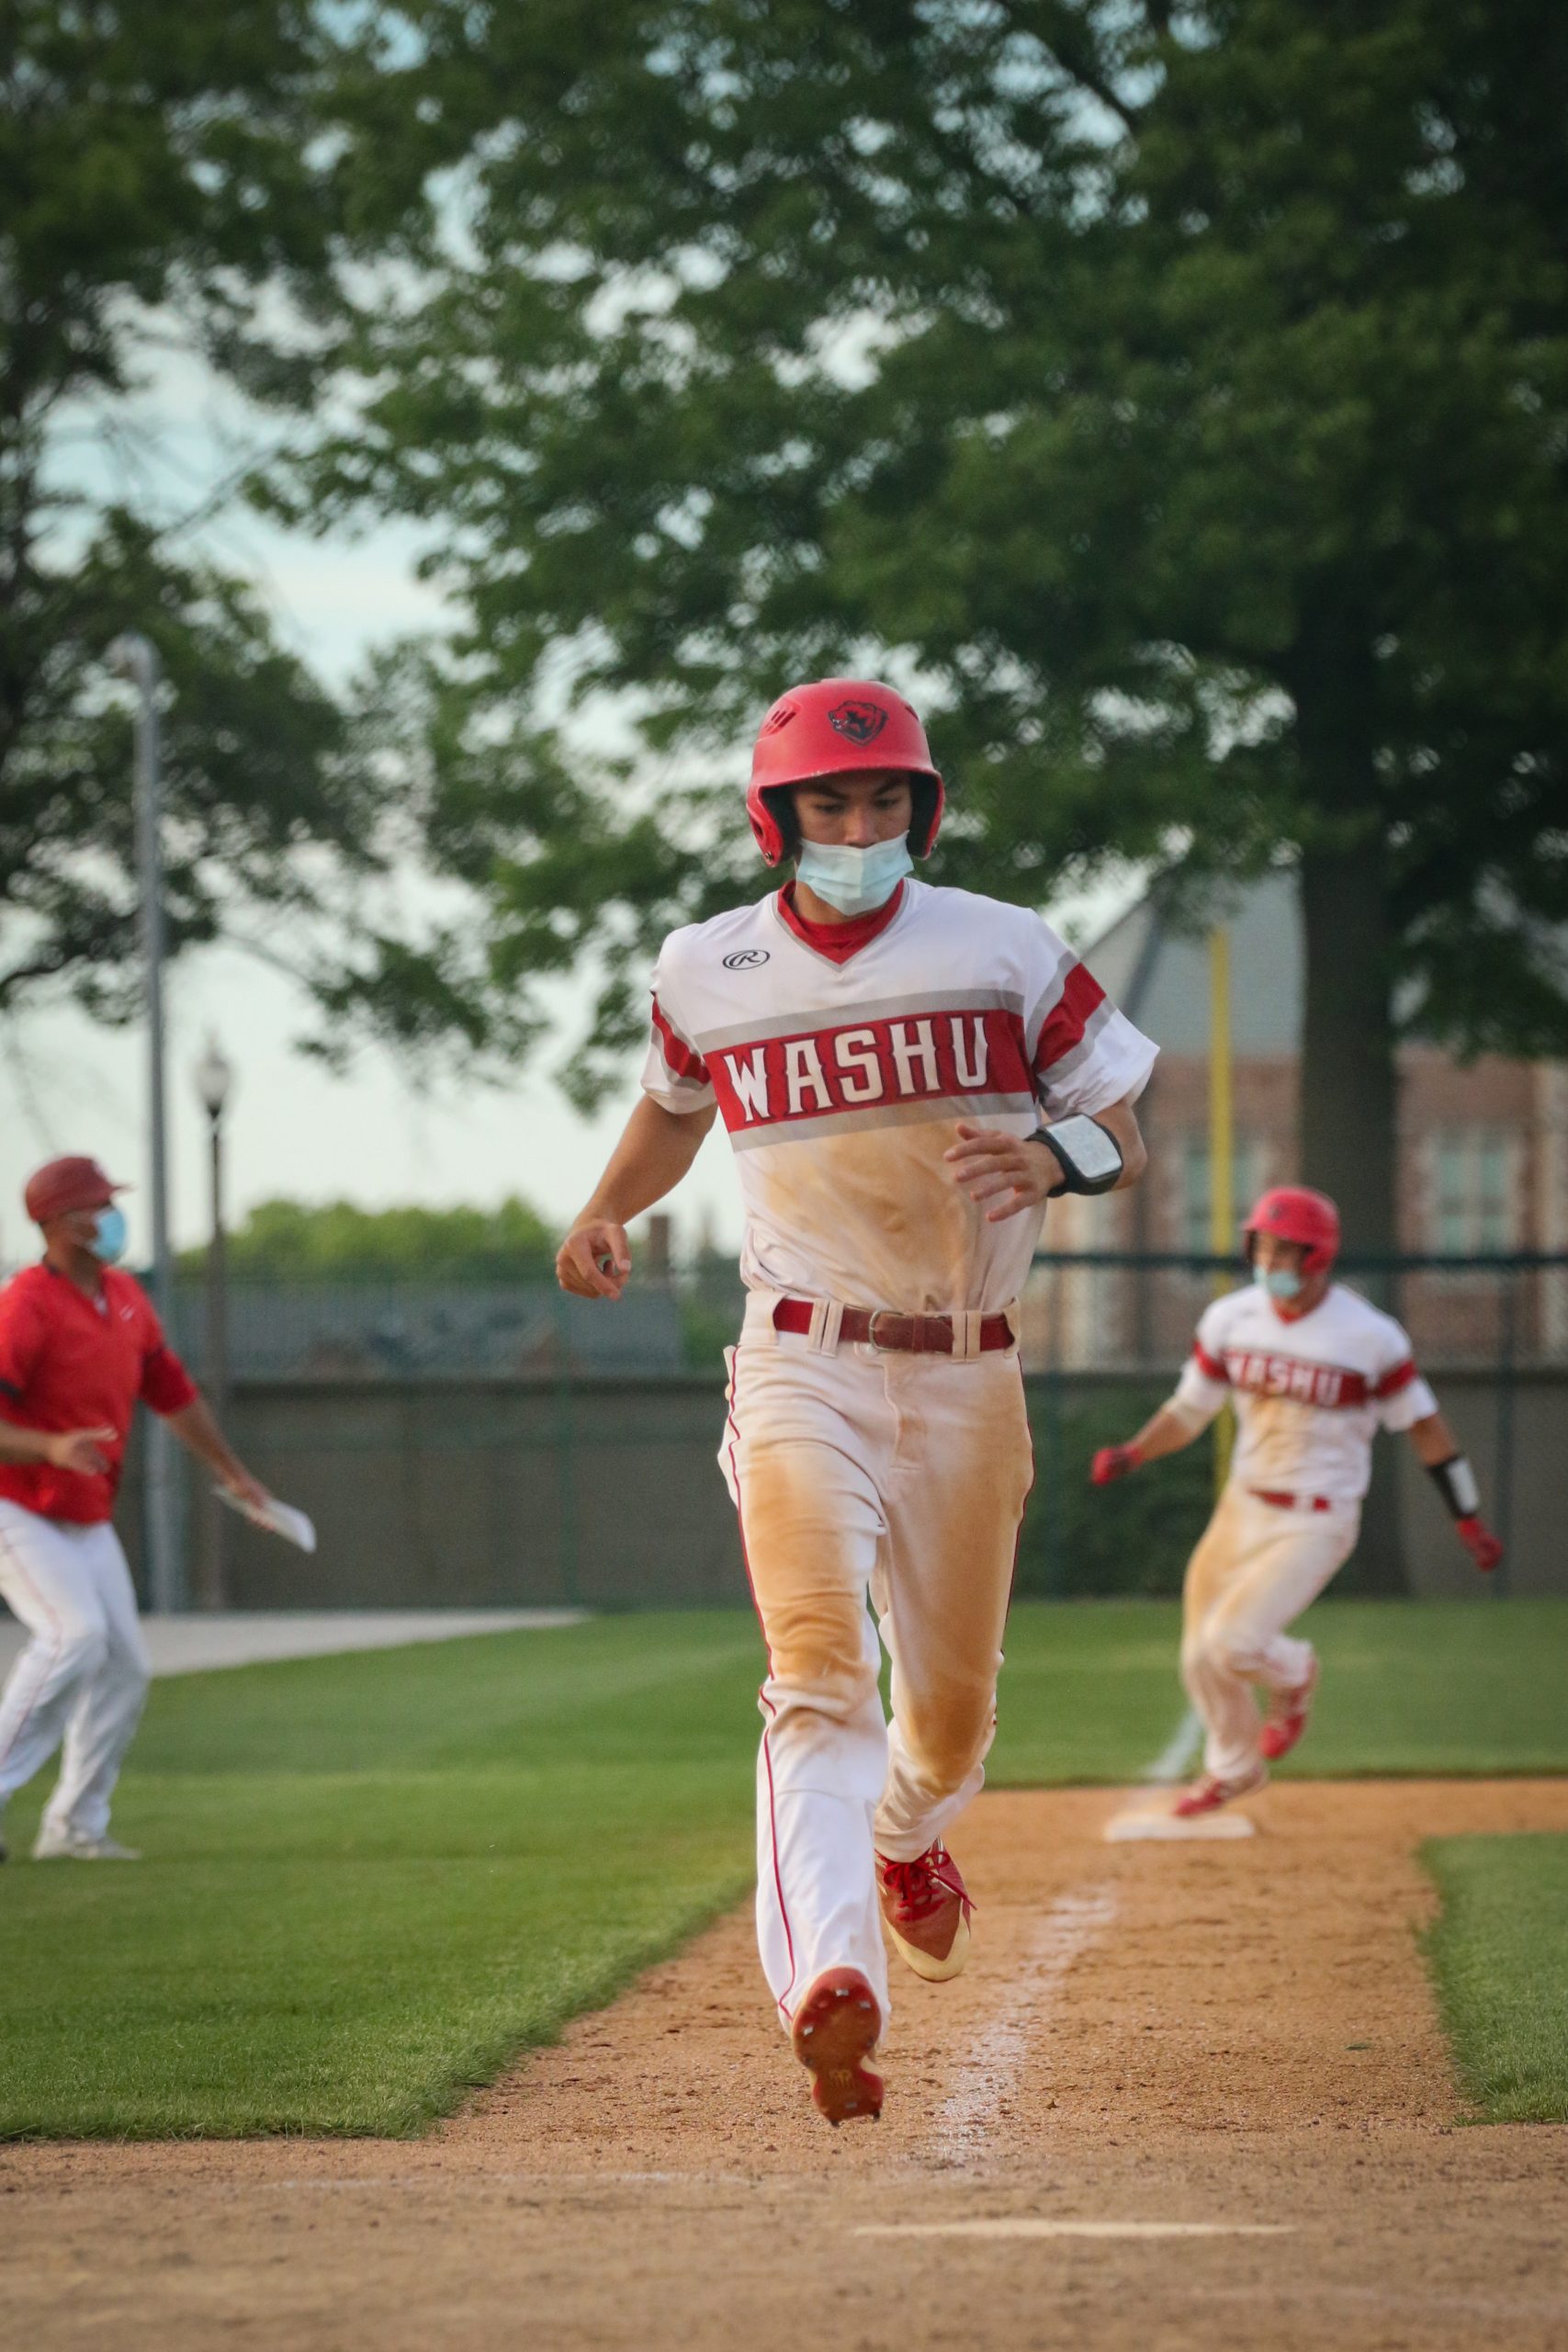 A player in a red and white uniform that reads "WashU" runs down the third base line as another player rounds third base behind him and a coach in a red shirt looks on from the left side.